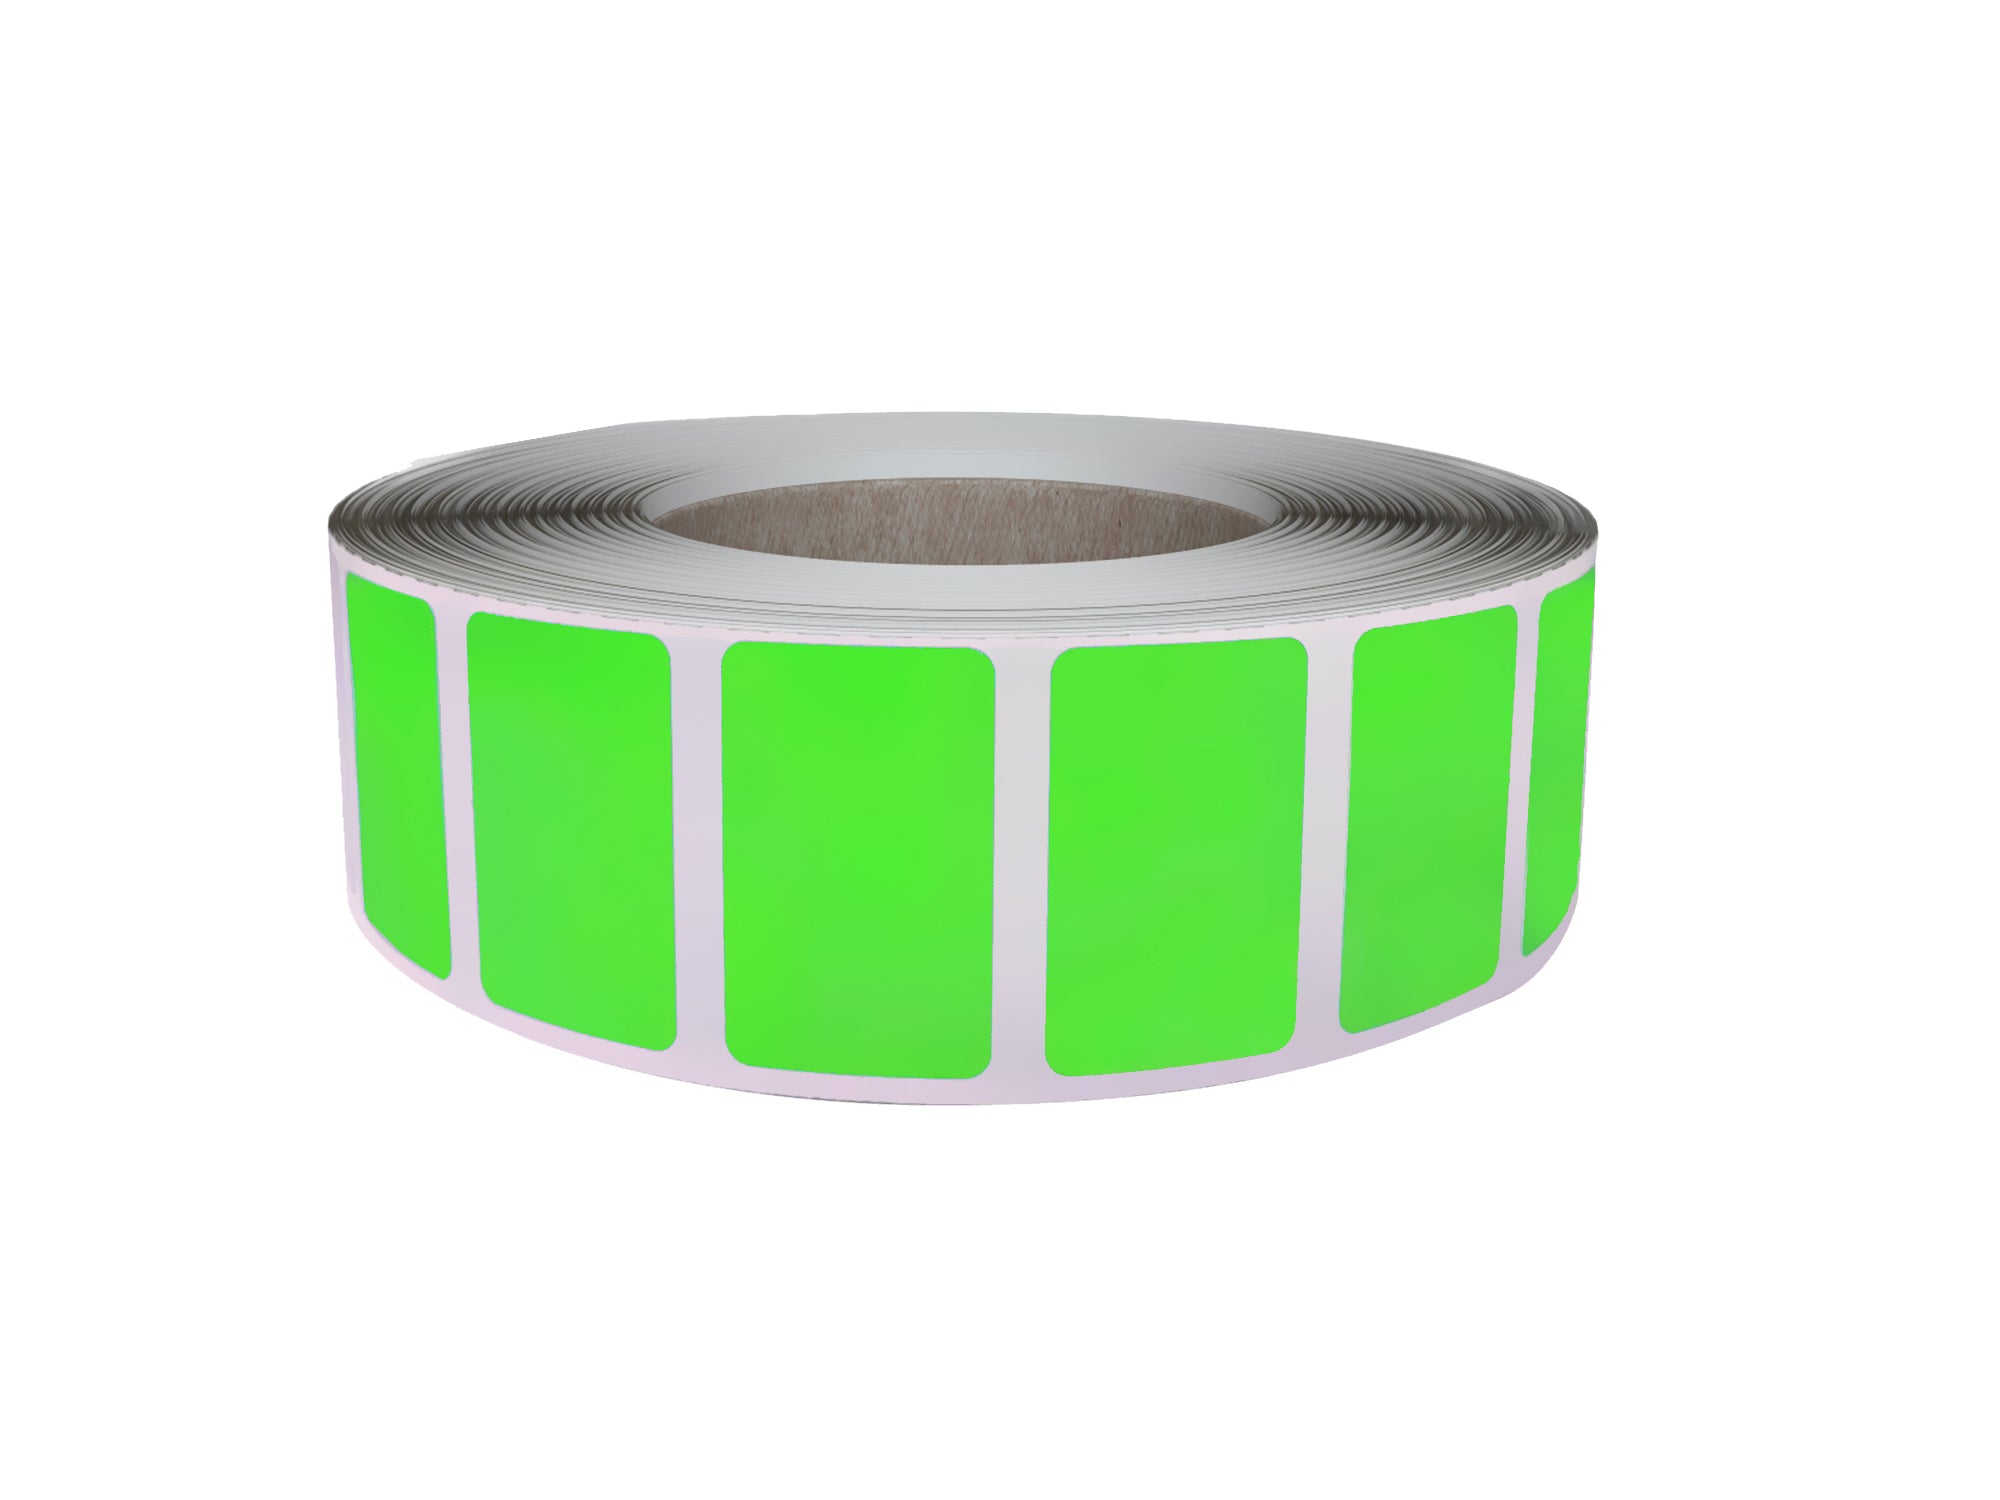 Royal Green Rectangular Removable Stickers 1 x 0.625 inch Label Rolls (25.5m x 16mm) 1000 / Neon Green